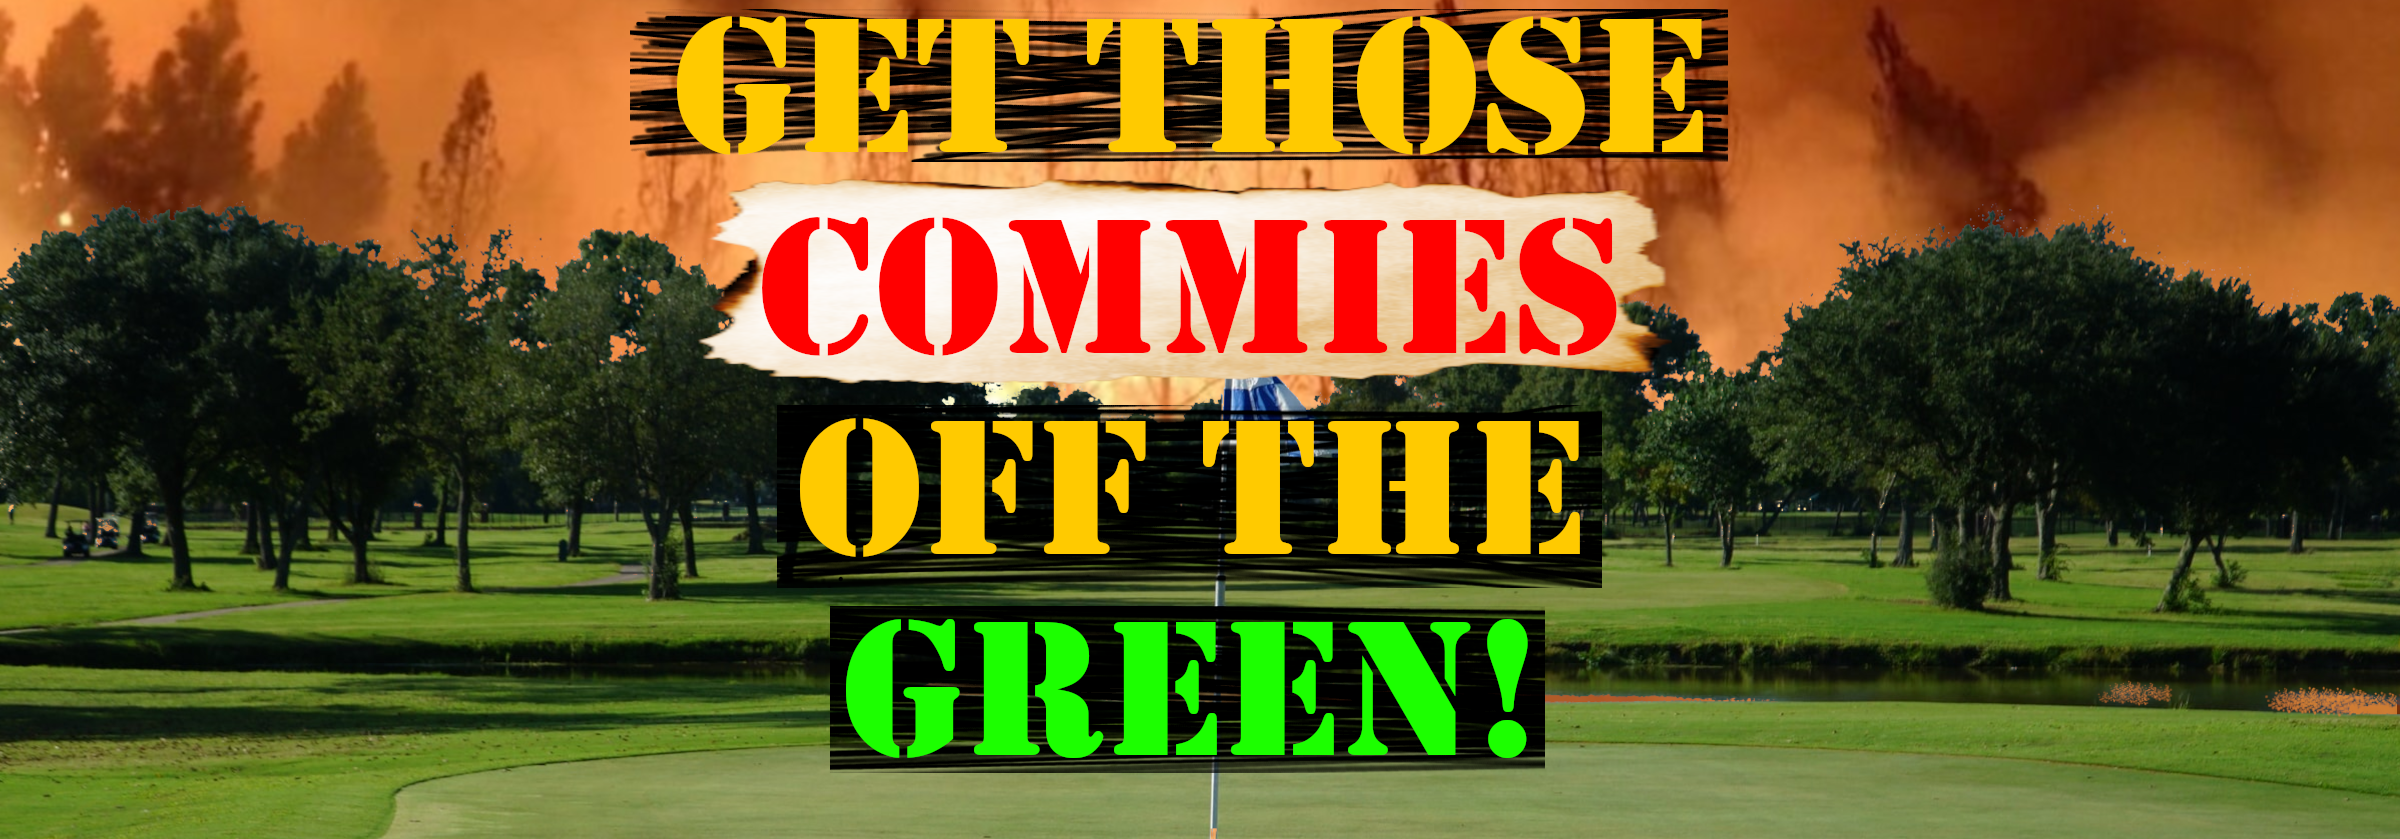 Get Those Commies Off The Green!